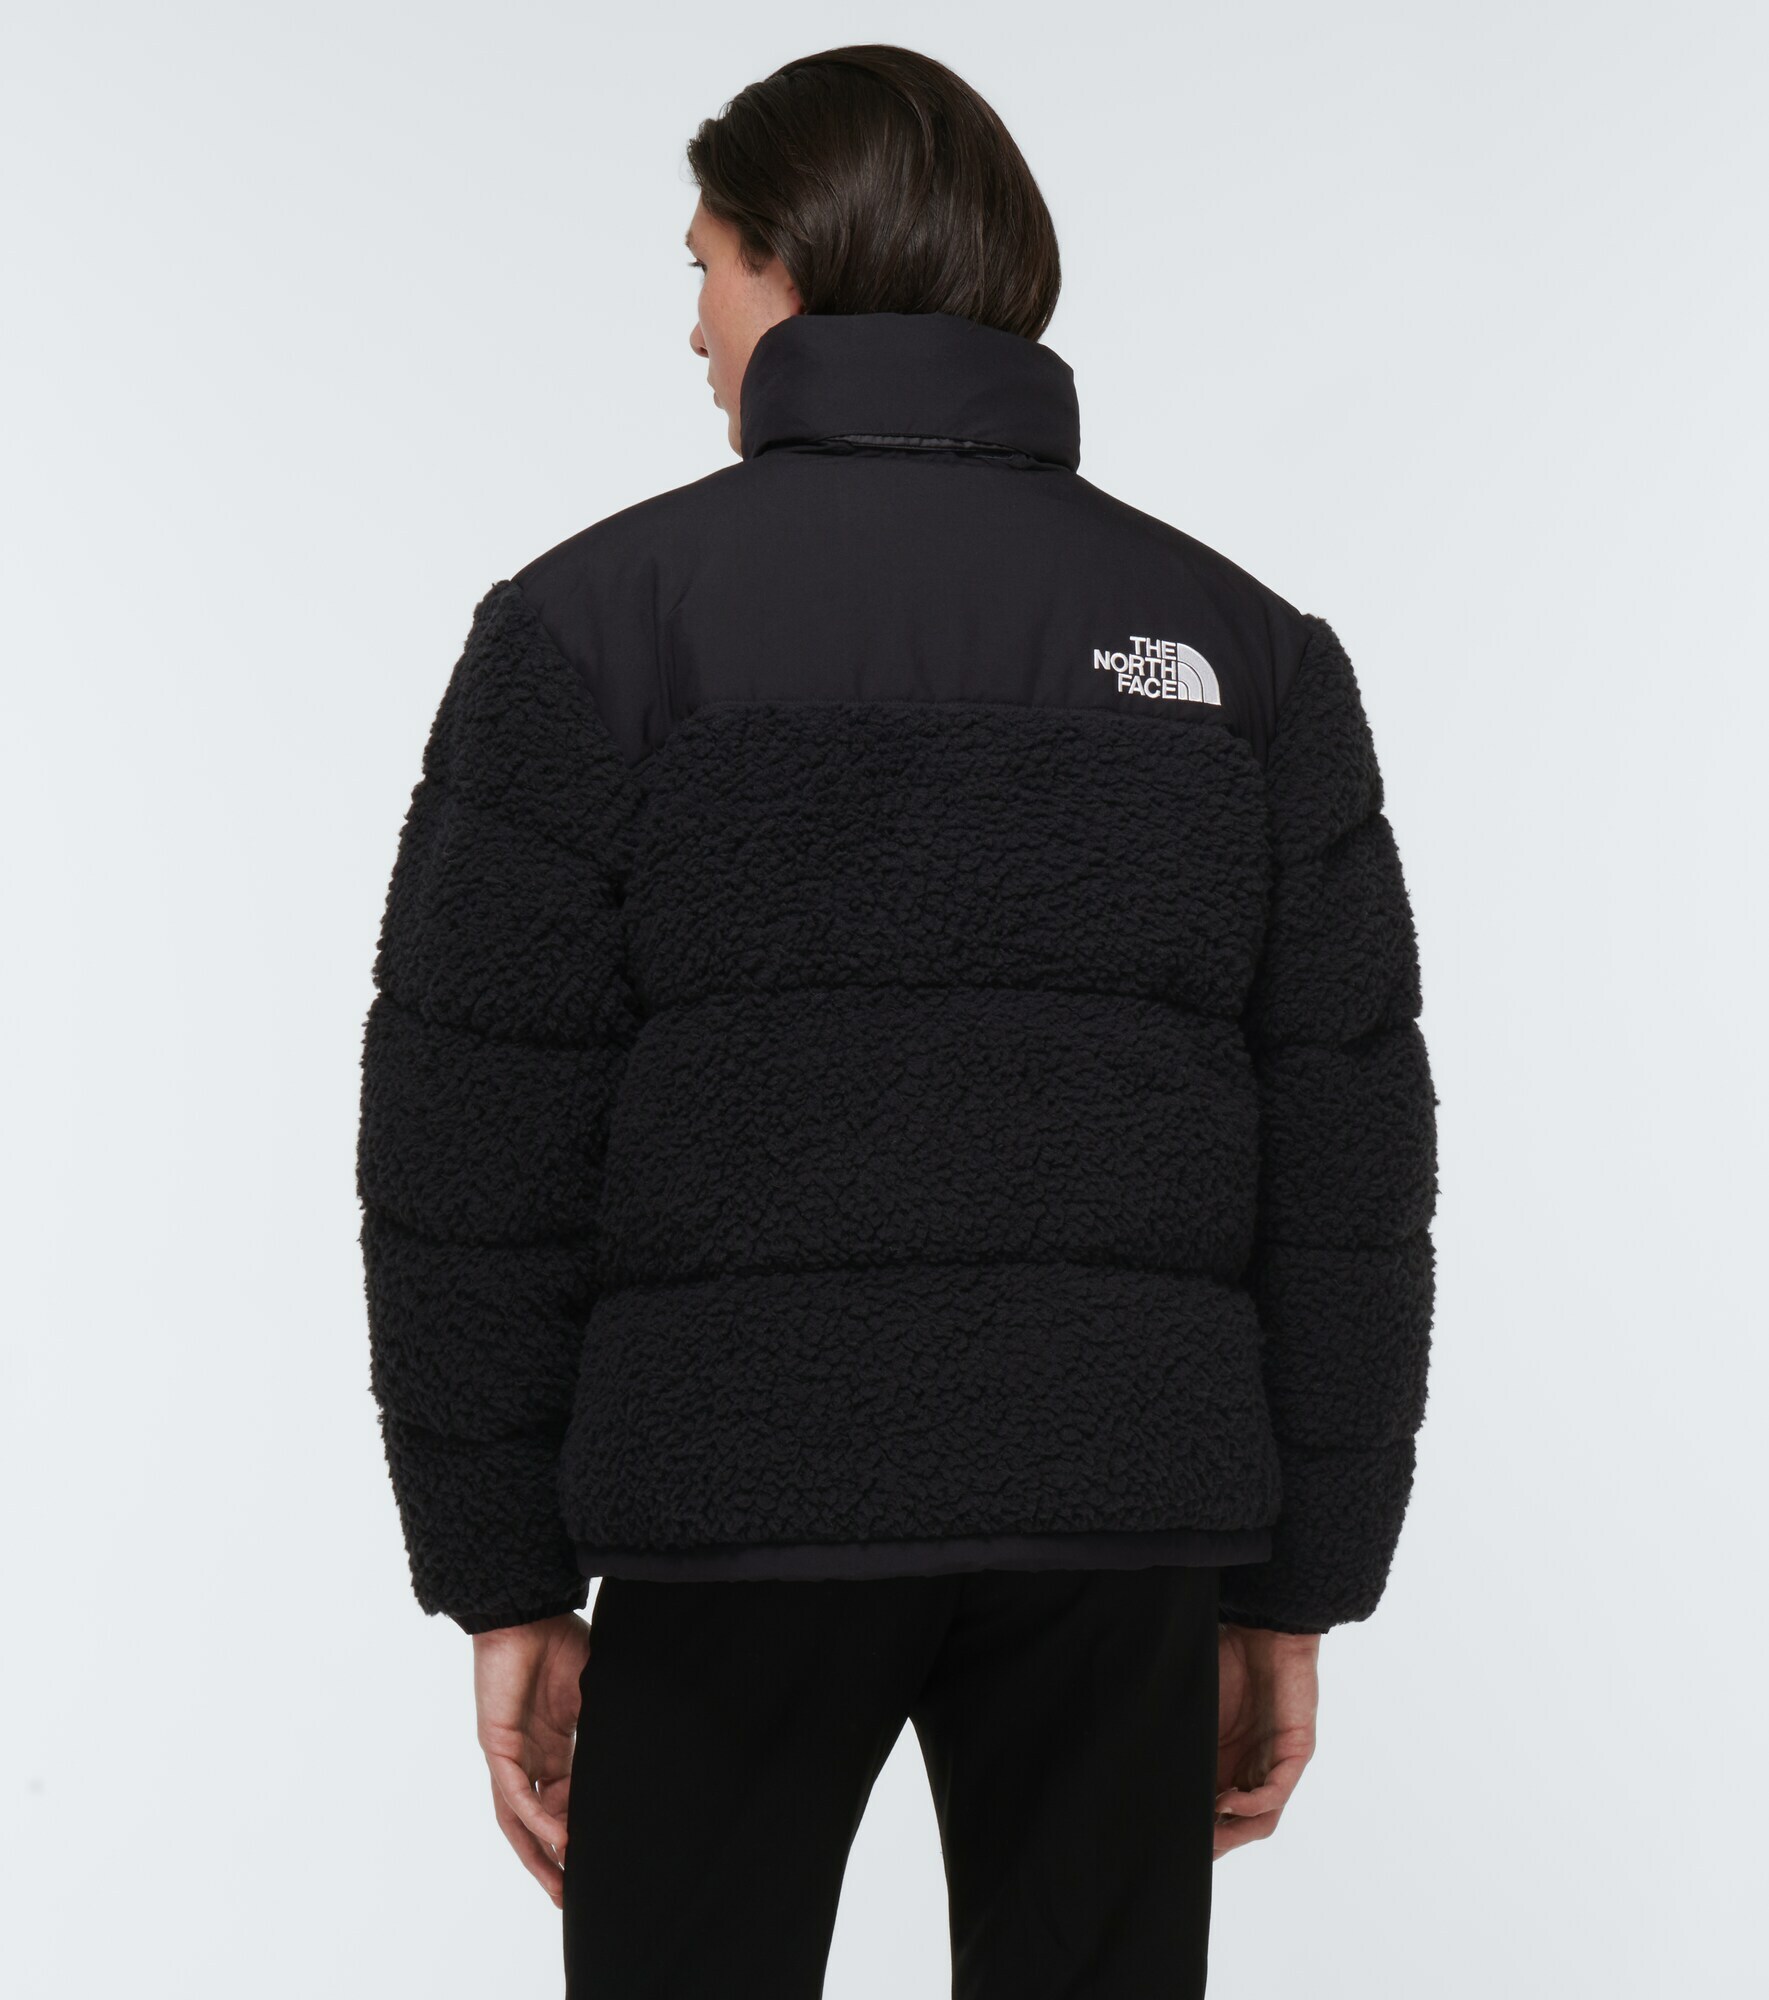 The North Face - Nuptse teddy jacket The North Face